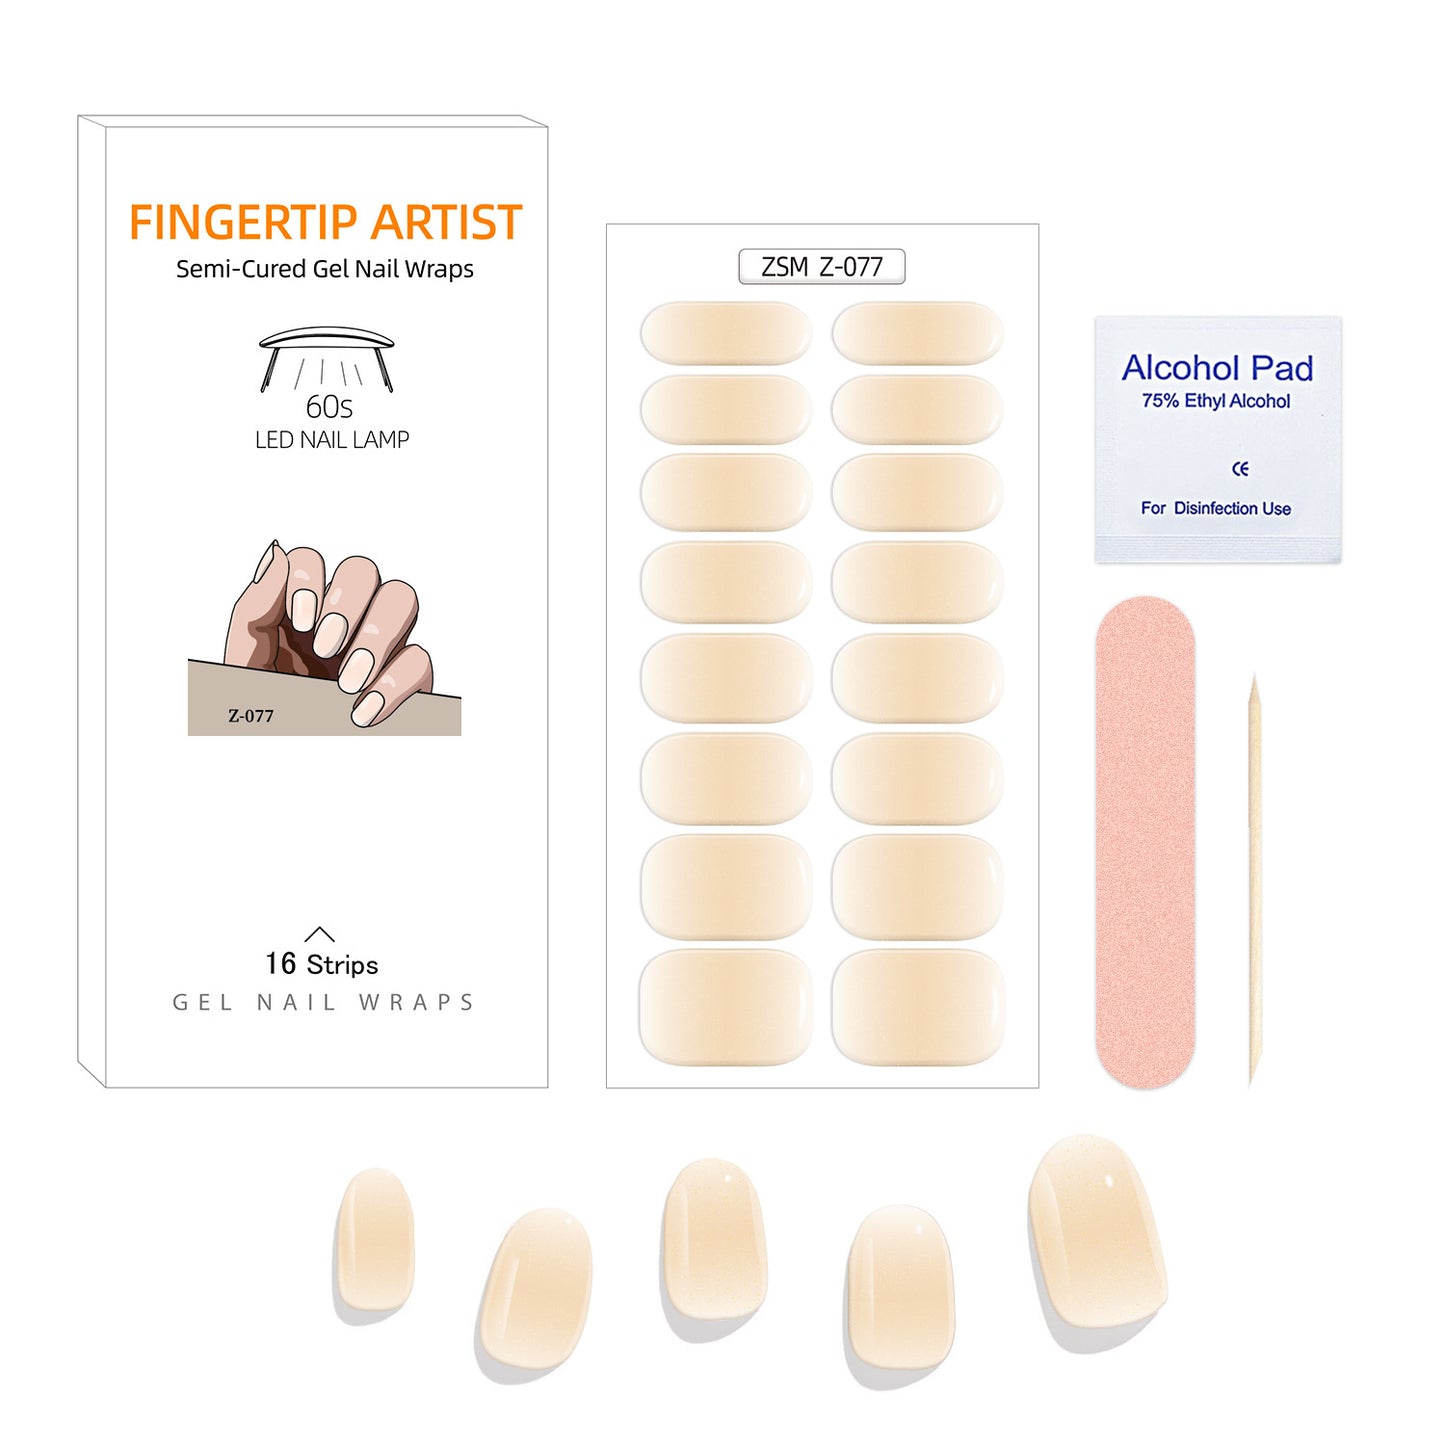 Gel Nail Art Stickers (Gradient Colors), Semi Cure Gel Nail Strips (16pcs), Real Nail Polish Art Stickers, Sticker Decoration Includes Preparation Pads, Nail Files and Wooden Sticks, Suitable For Women, Girls